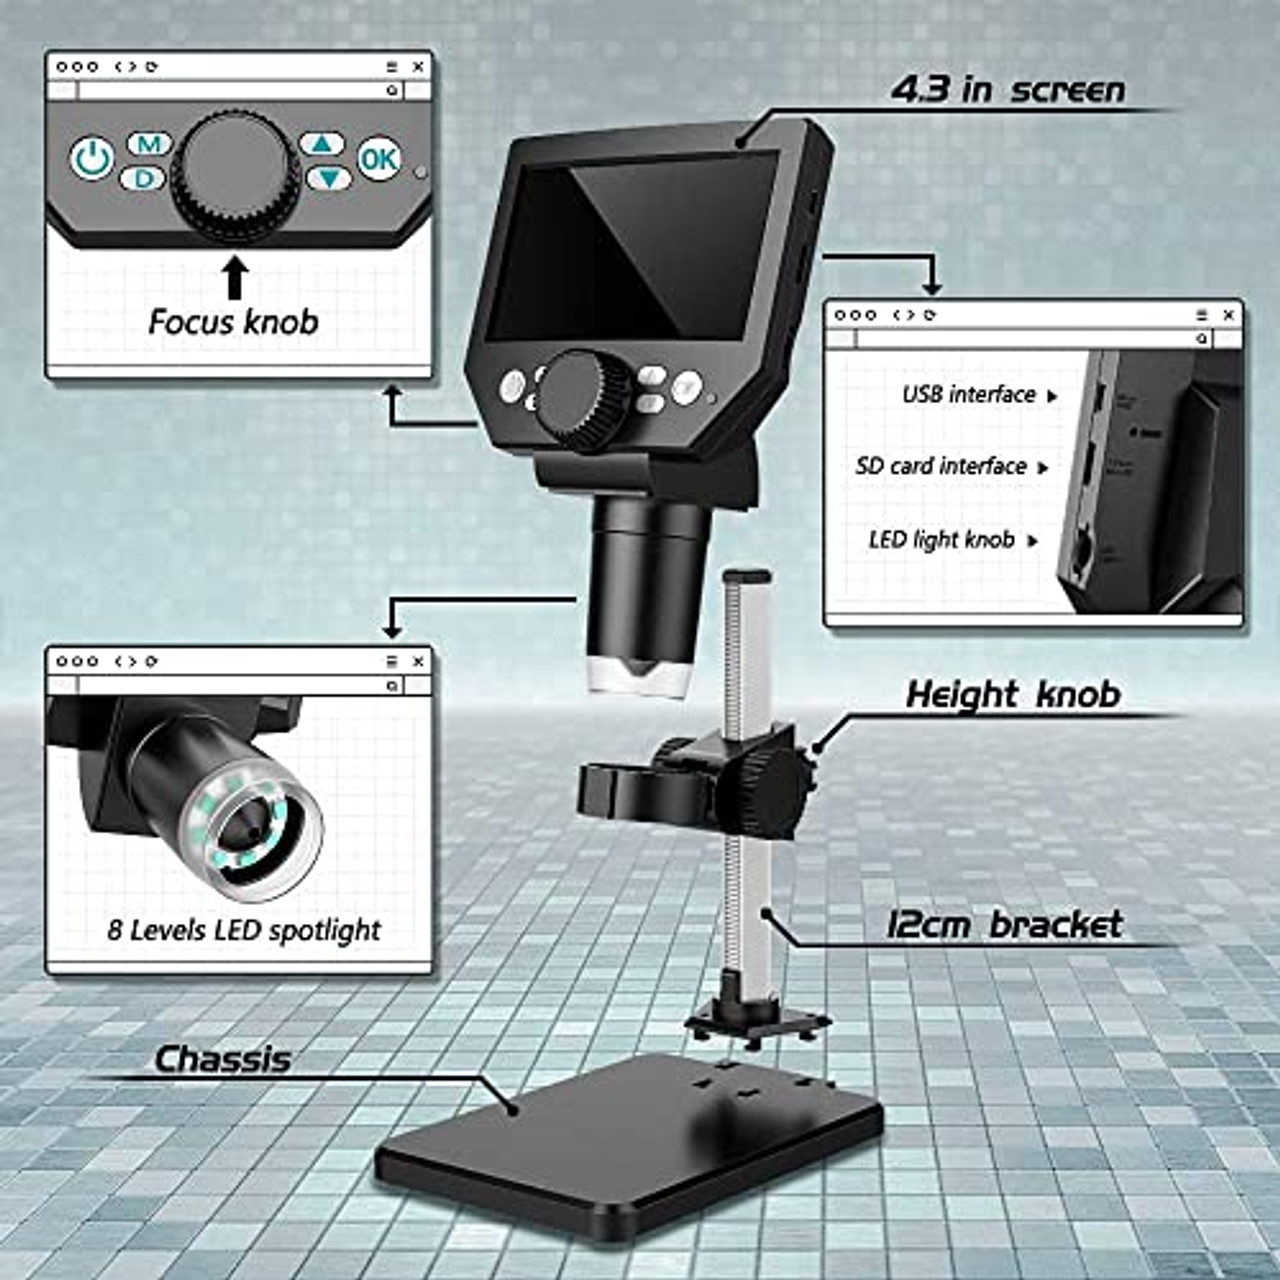 Coin Microscope,5.5 LCD Digital USB Microscope with 32G TF Card,Micsci  Coin Magnifier 1000X 1080P Handheld Video Camera,PC View,Rechargeable